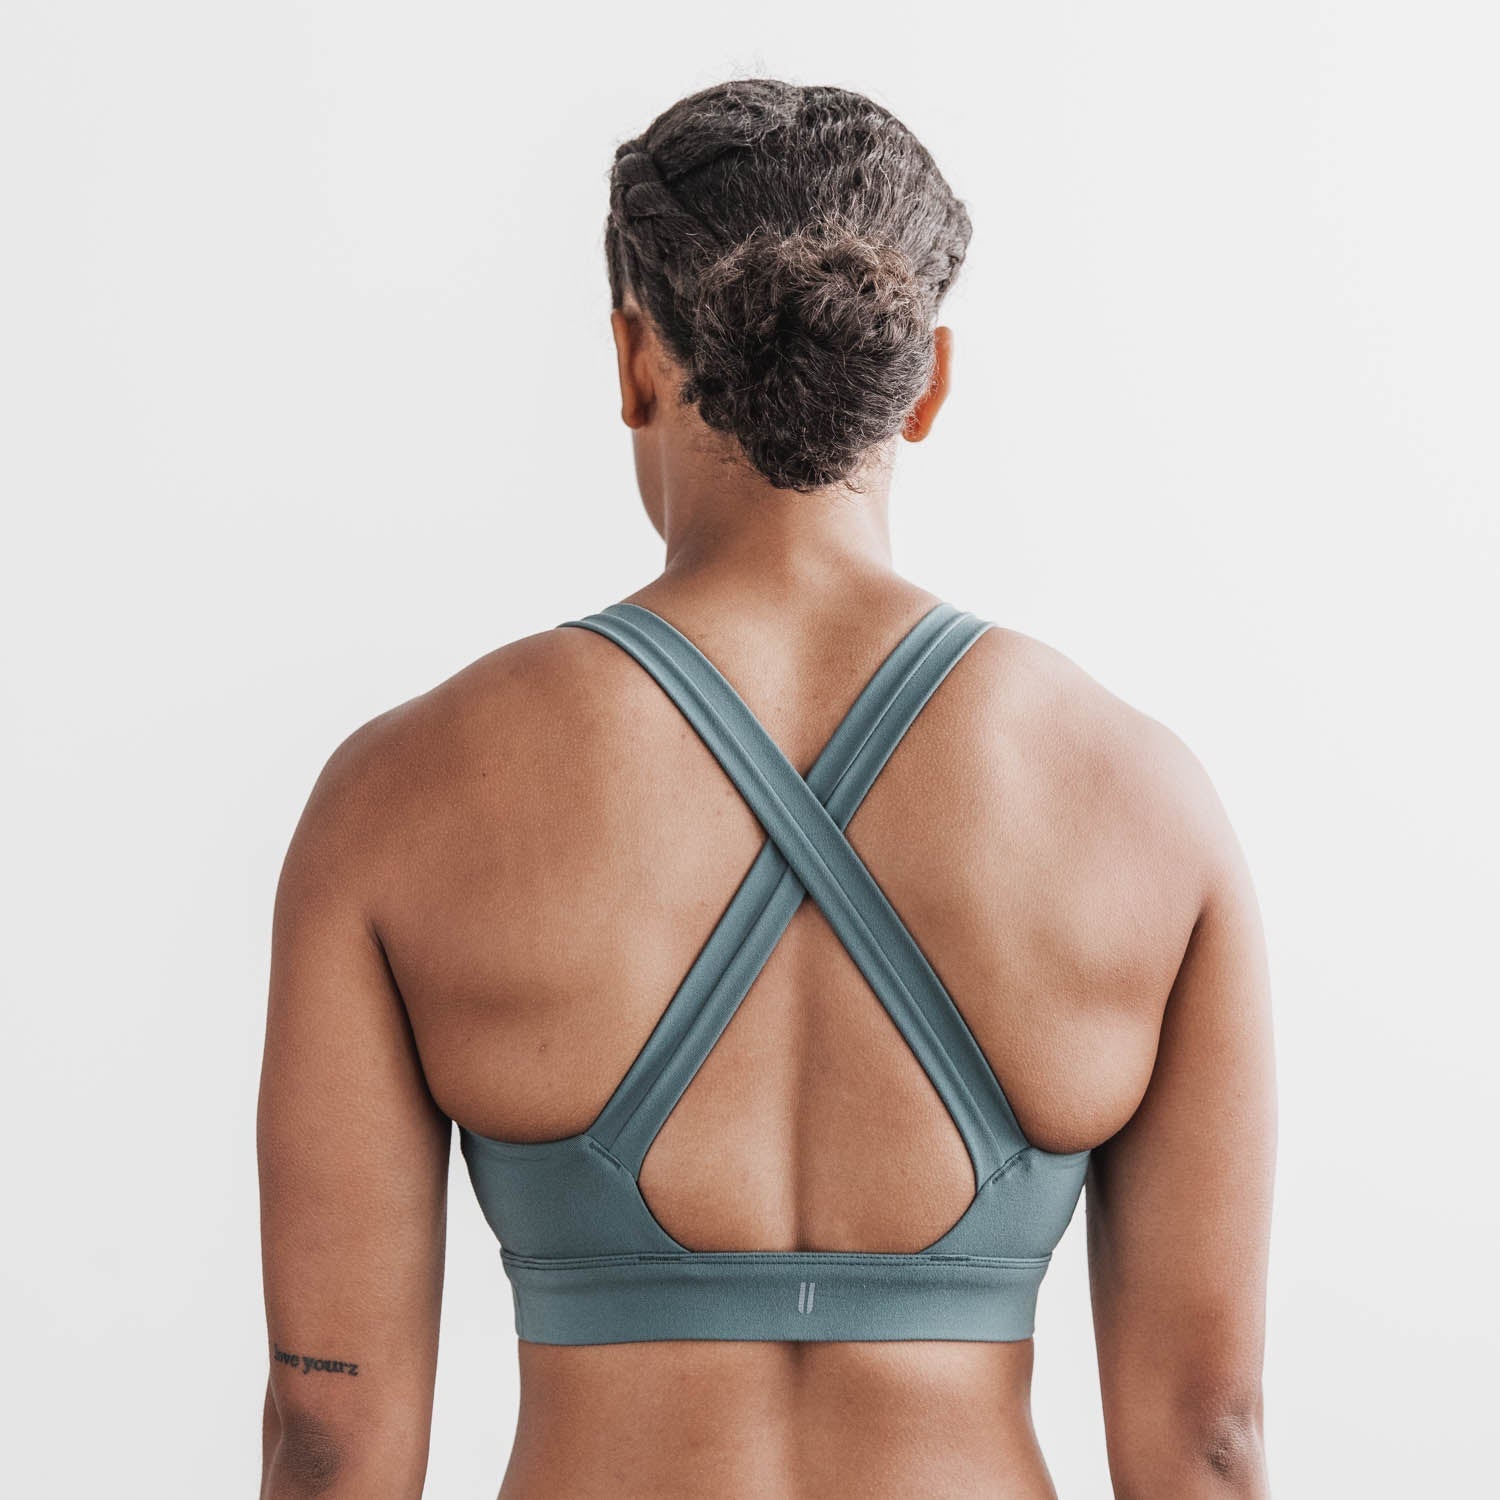 always looking for supportive sports bras! the energy bra high